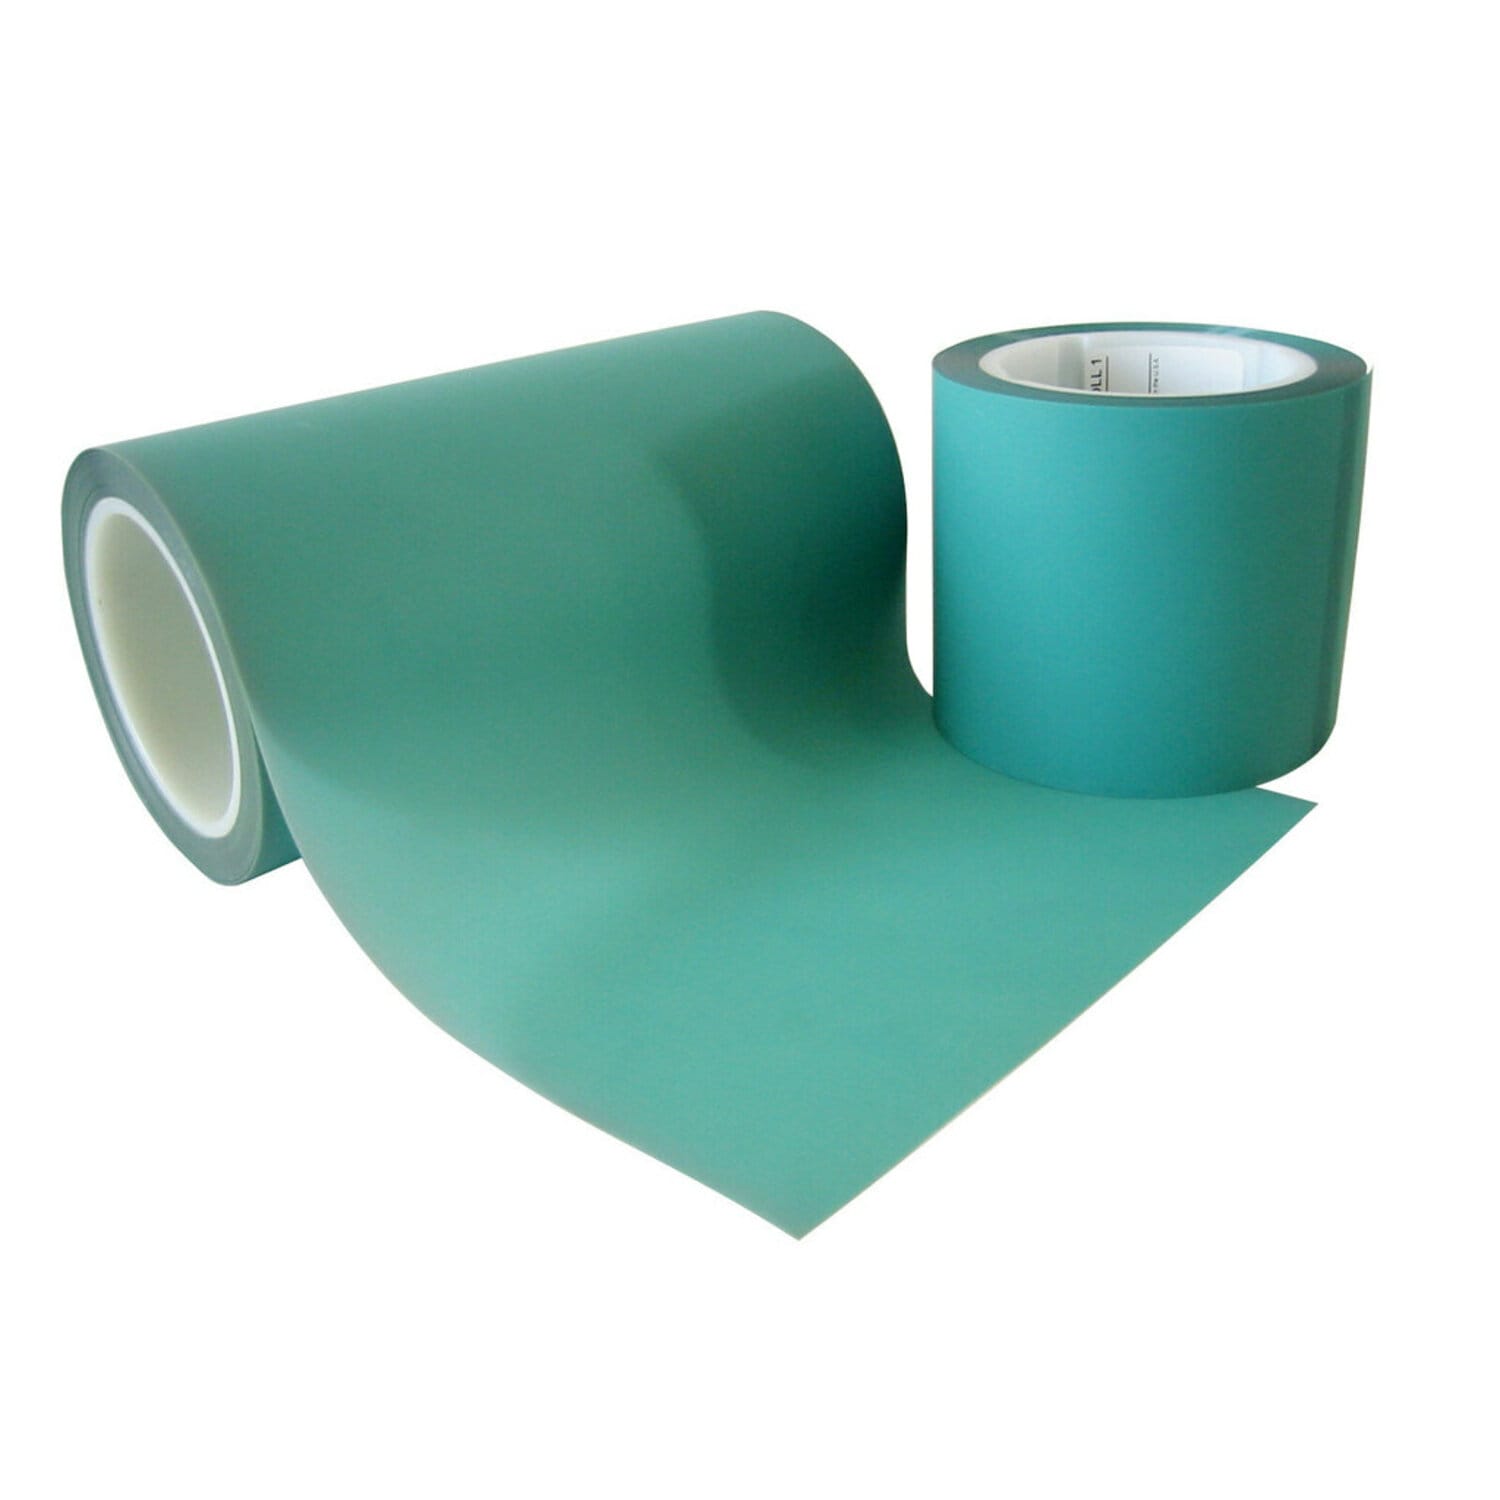 7000044808 - 3M Lapping Film 262X, Sheets and Rolls, 1 micron, 3 mil, AO, 4.5 in x
5.5 in